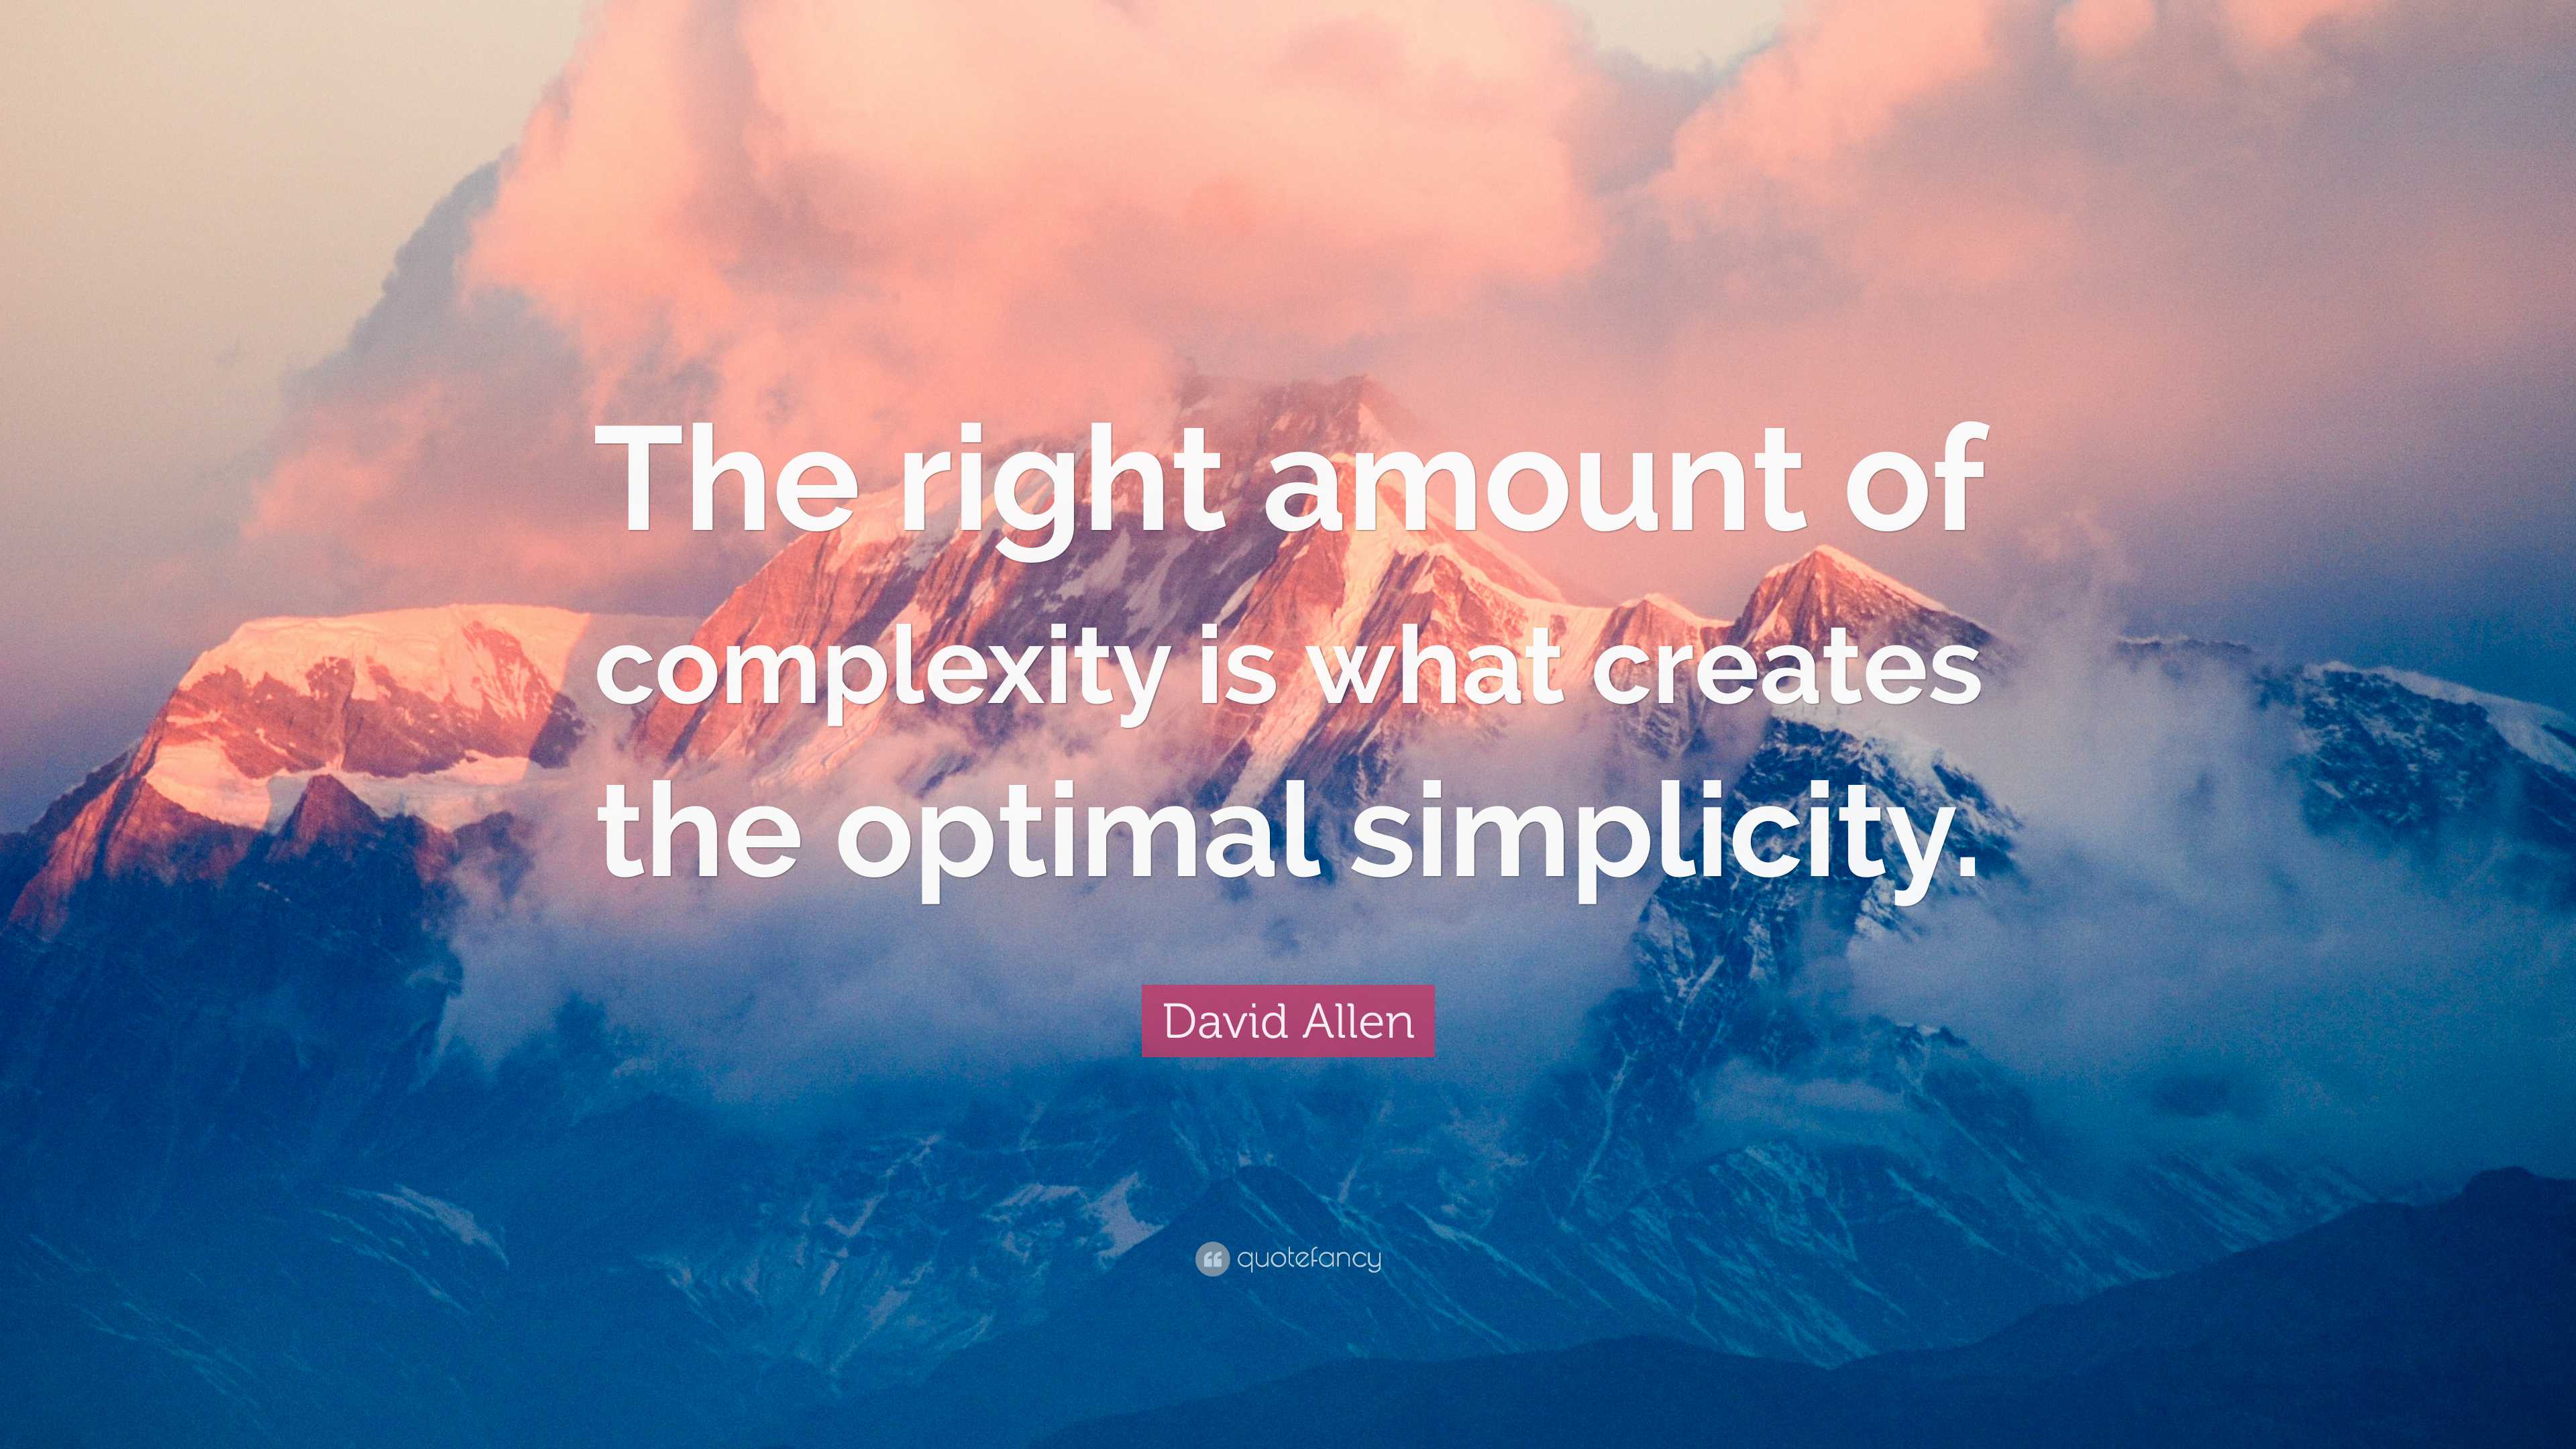 Simplicity is An Advantage but Sadly Complexity Sells Better